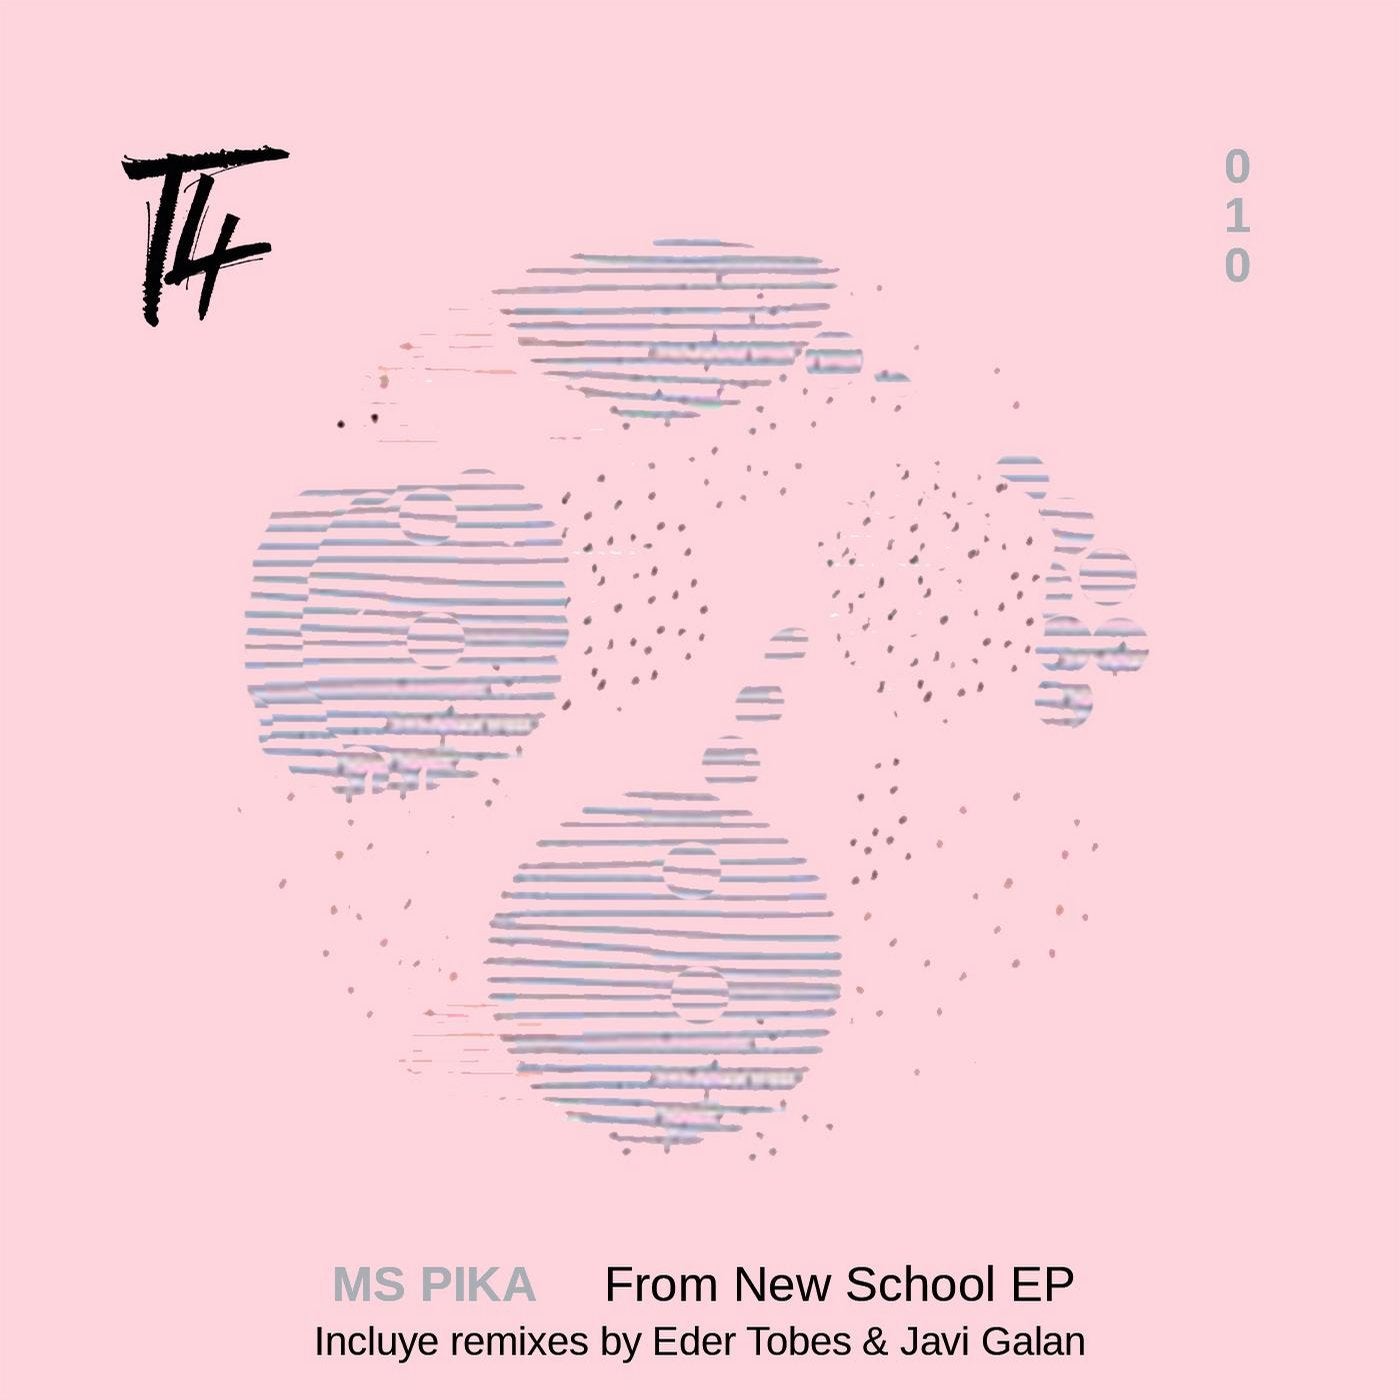 From New School EP